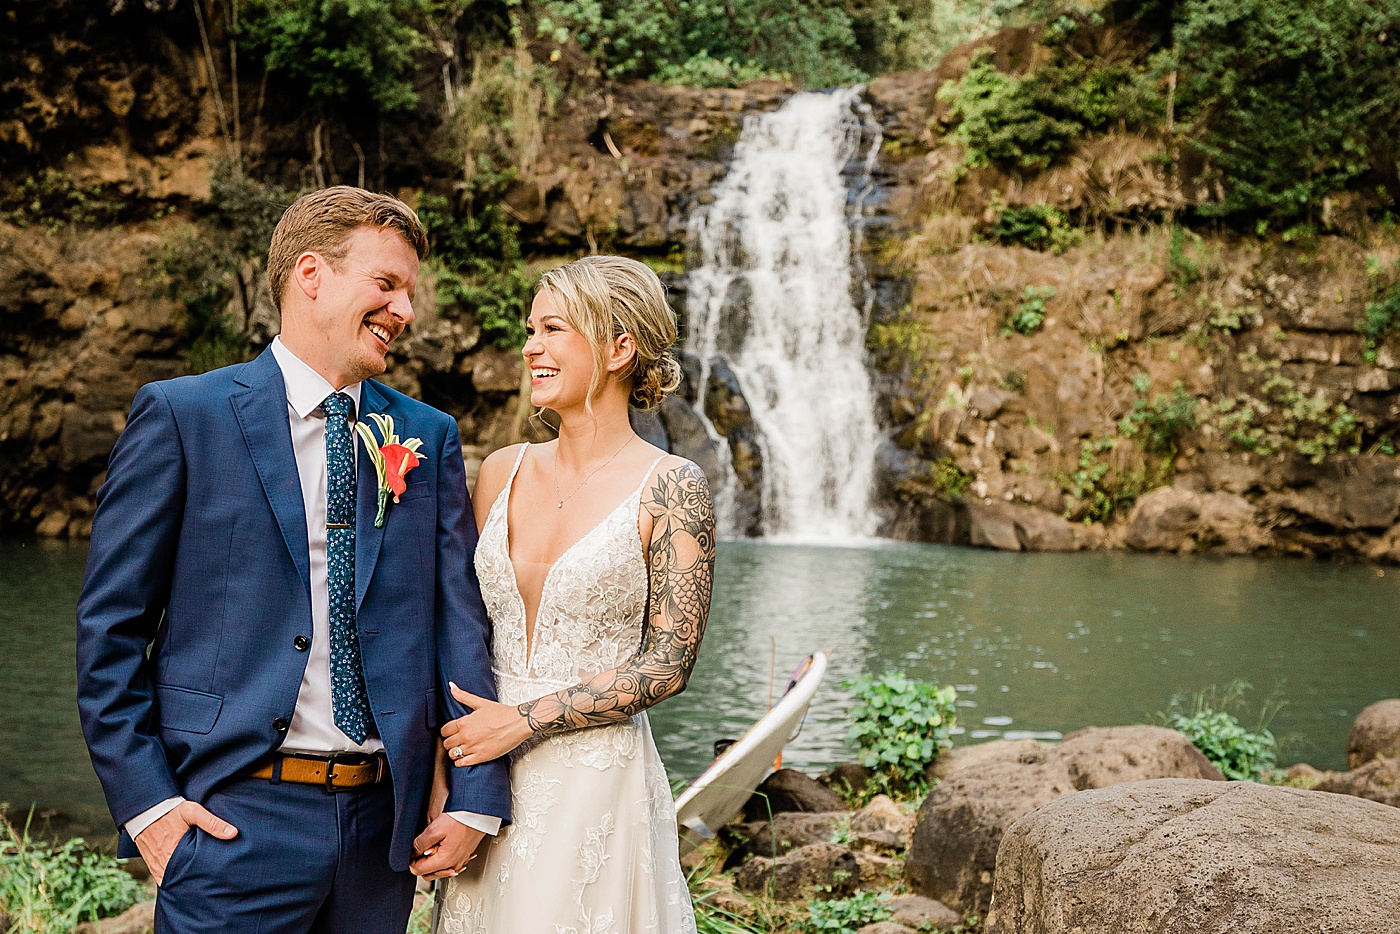 Waimea Valley wedding. Bride and groom holding hands and laughing in front of waterfall.